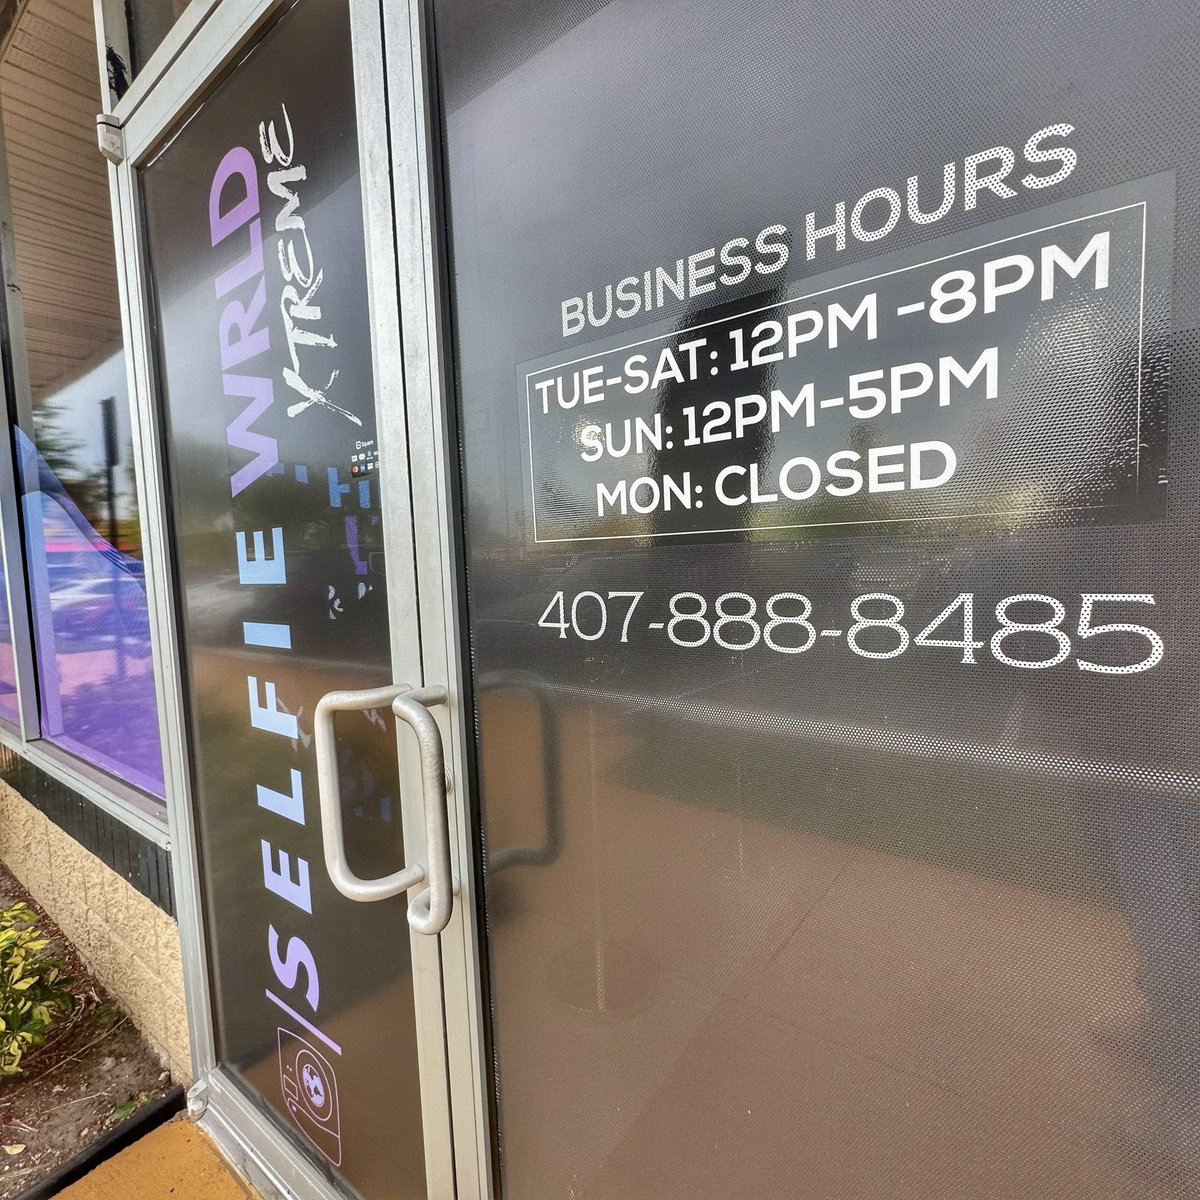 Selfie Wrld Xtreme’s official hours! Also, their phone number incase you need to call them. Time to find your selfie. ❤️
.
#Orlando #SelfieNation #SelfieLover
#OrlandoFlorida #SelfieWrldBlogger
#Florida #SelfieWrldXtreme #Selfie
#DowntownOrlando #SelfieWrld 🌎